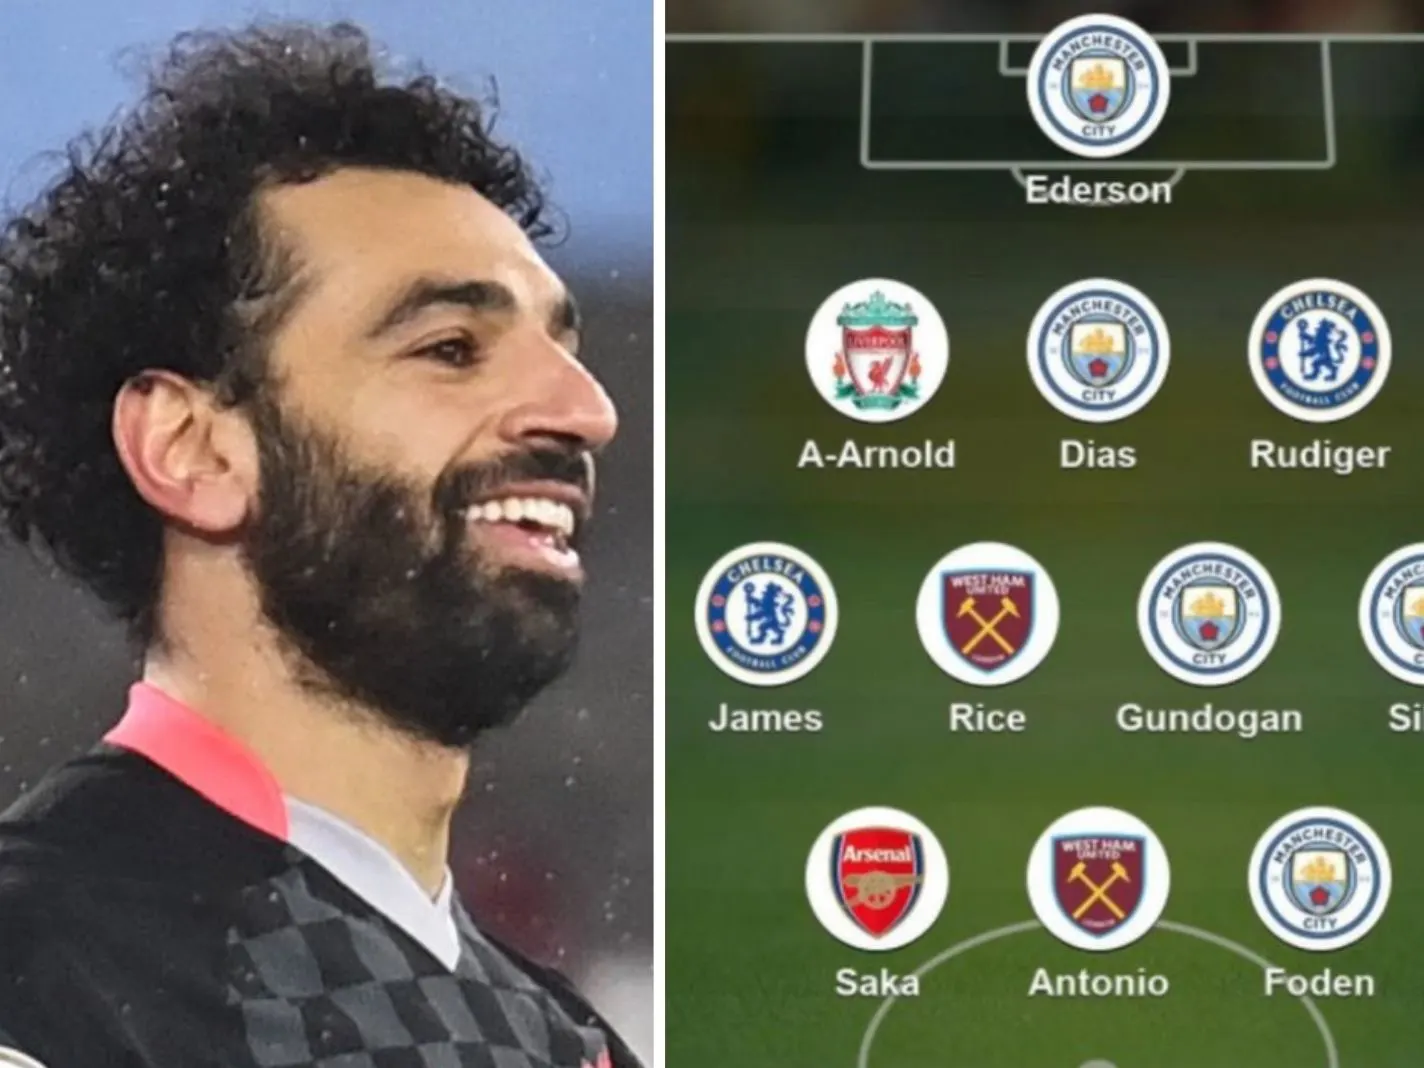 Mohamed Salah was not picked in Garth Crooks' team of the year